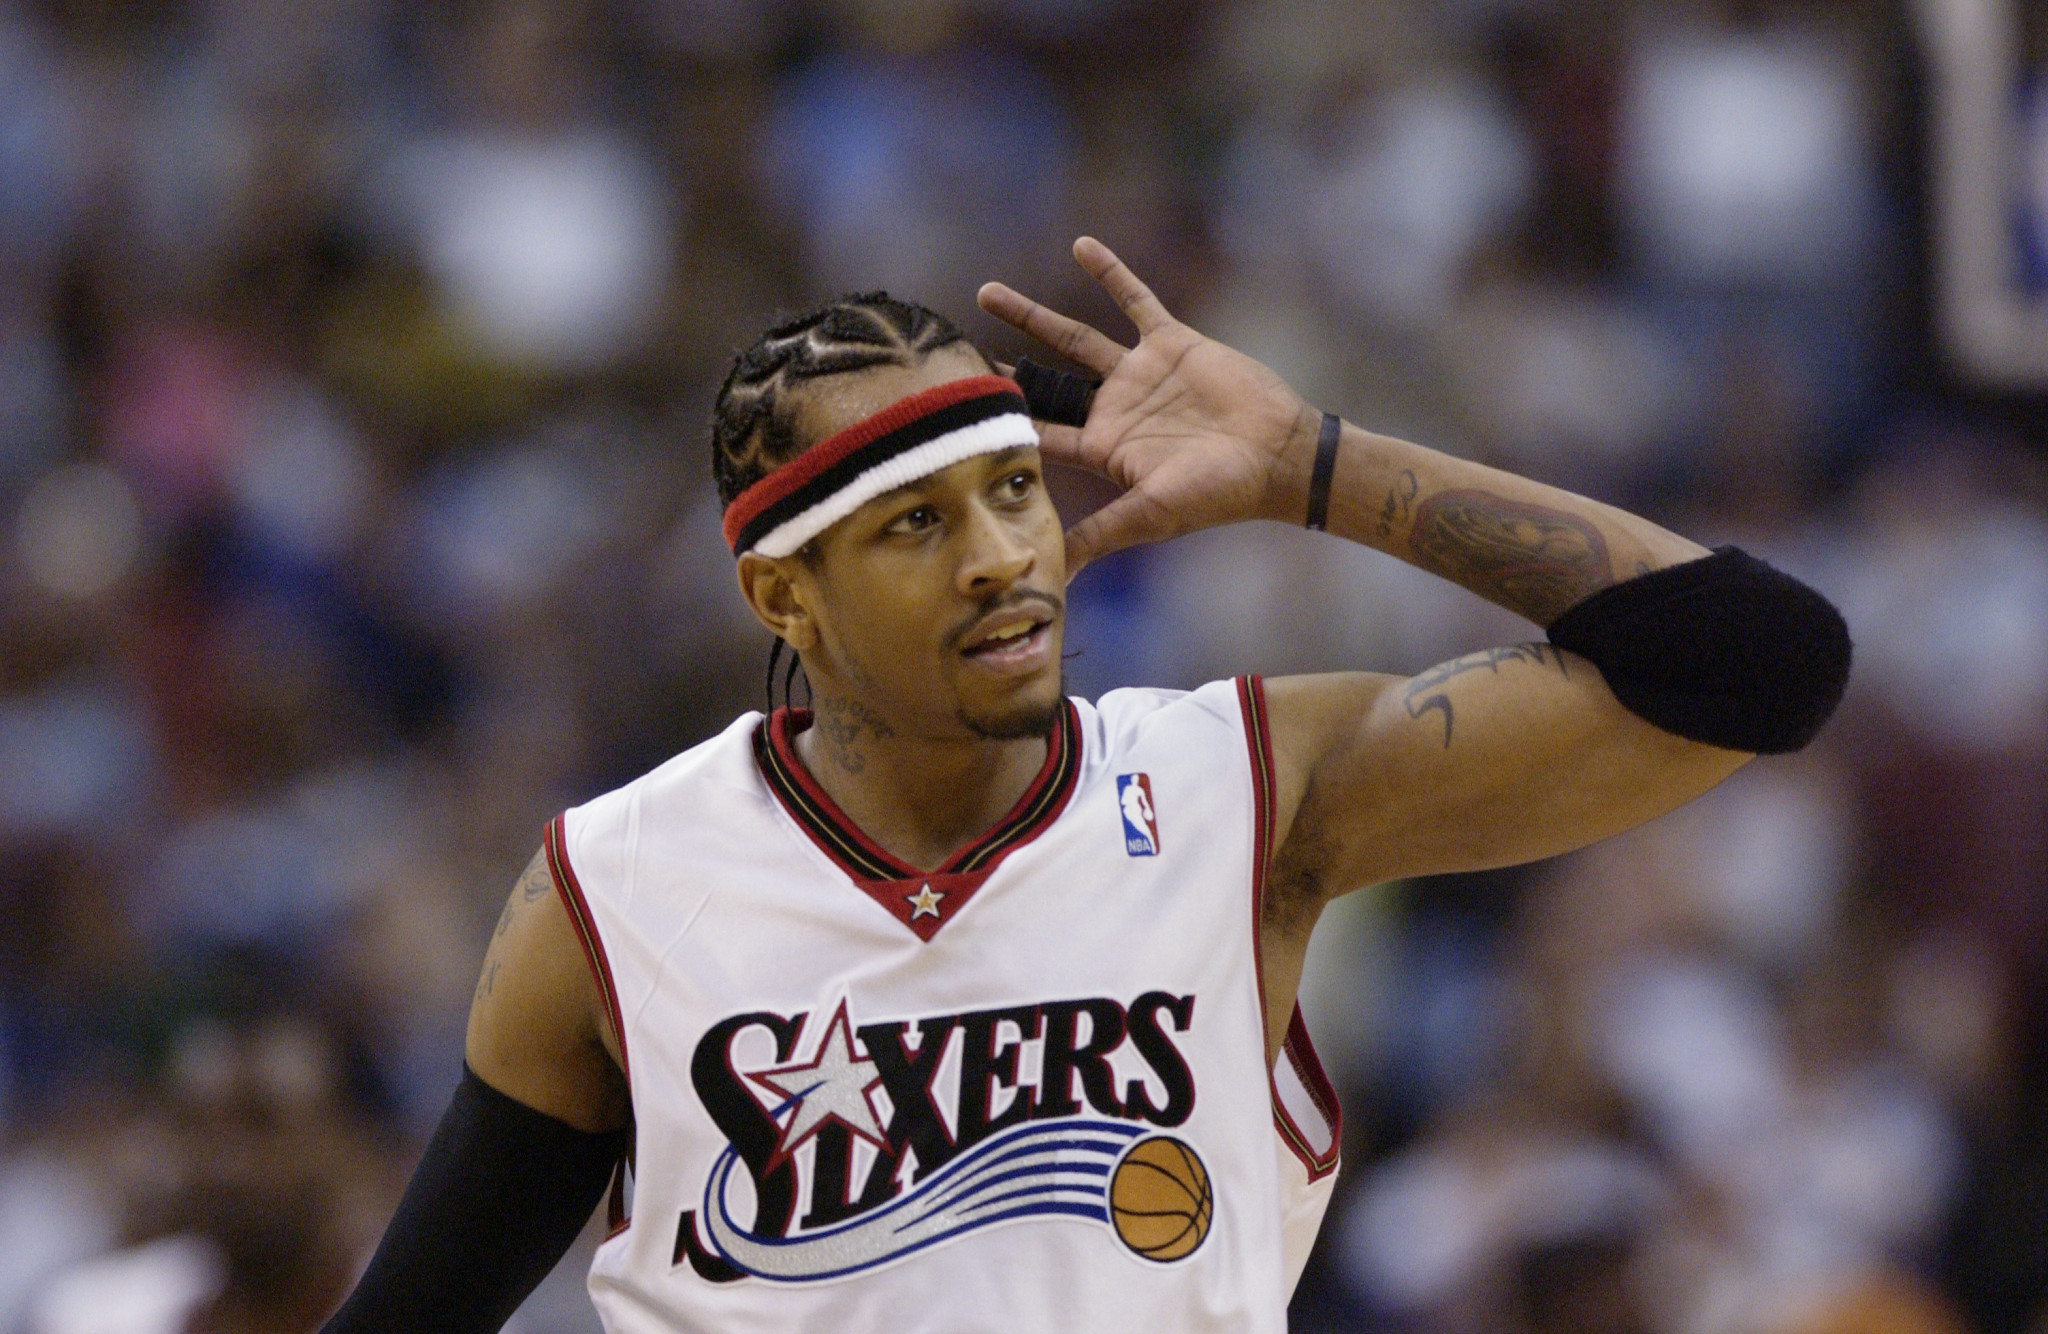 Basketball shoes signed by American Olympic bronze medallist and 11-time NBA All-Star Allen Iverson will be auctioned as part of this year's Shoot for the Cure initiative ©Getty Images